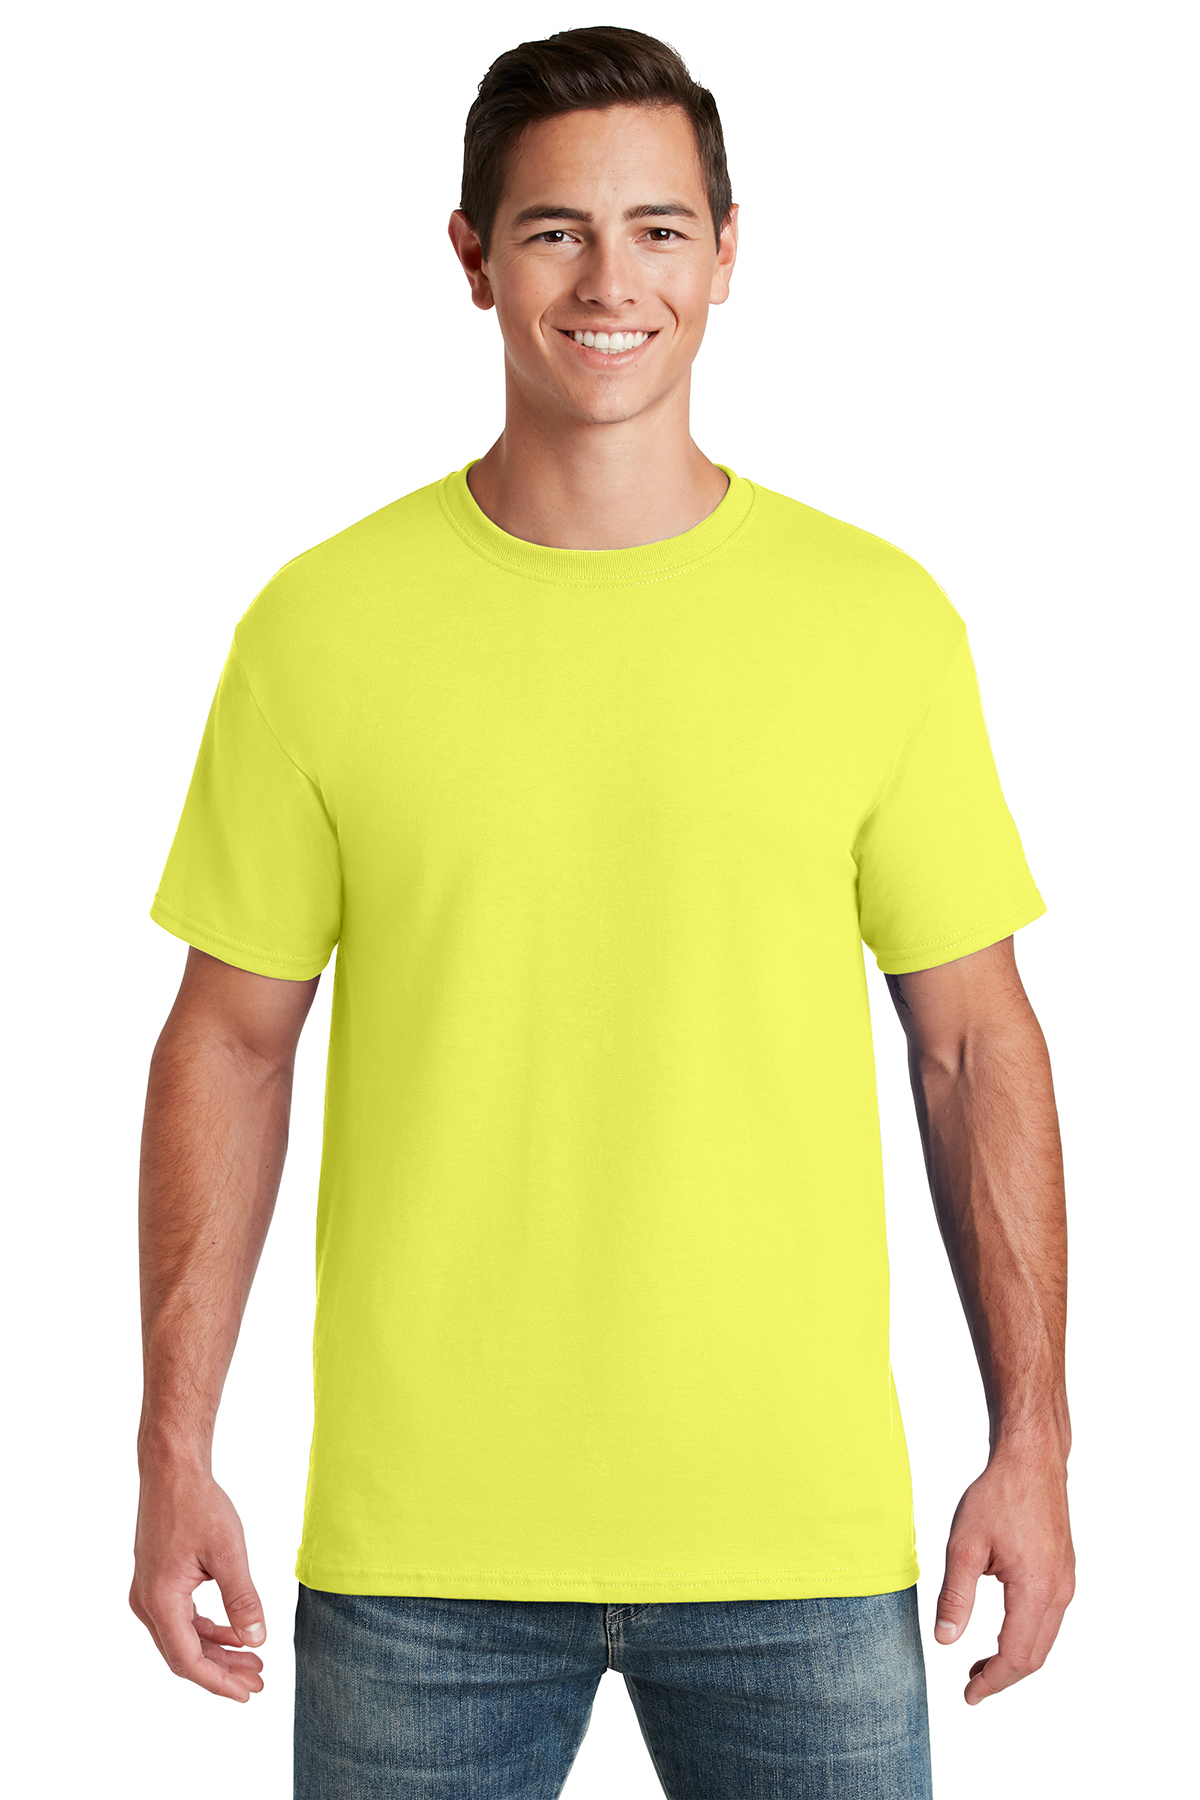 Jerzees - Dri-Power 50/50 Cotton/Poly T-Shirt | Product | Company Casuals